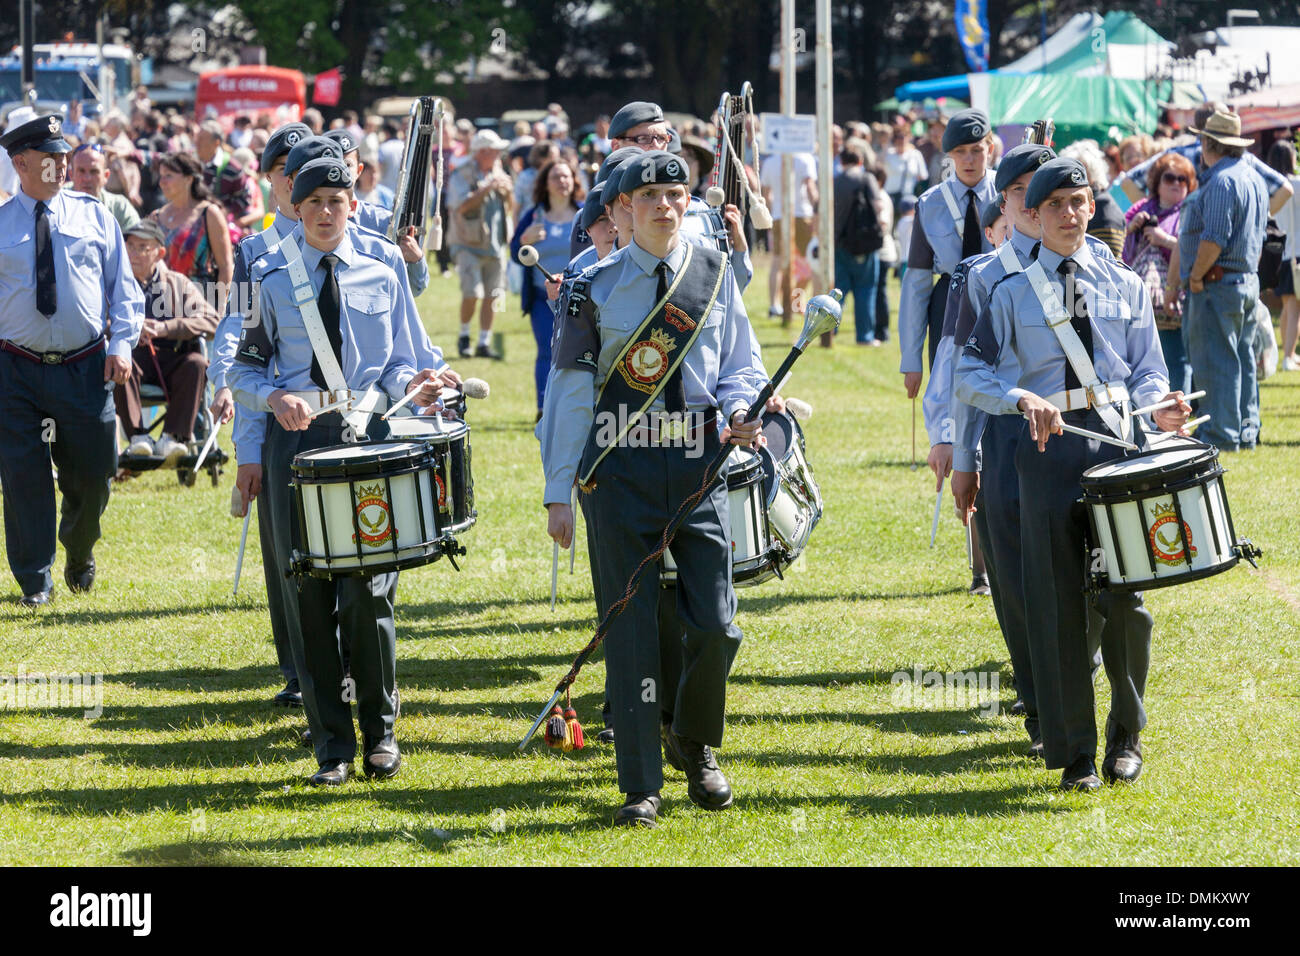 Air cadet marching band, Steam Rally, Abergavenny, Wales, UK Stock Photo